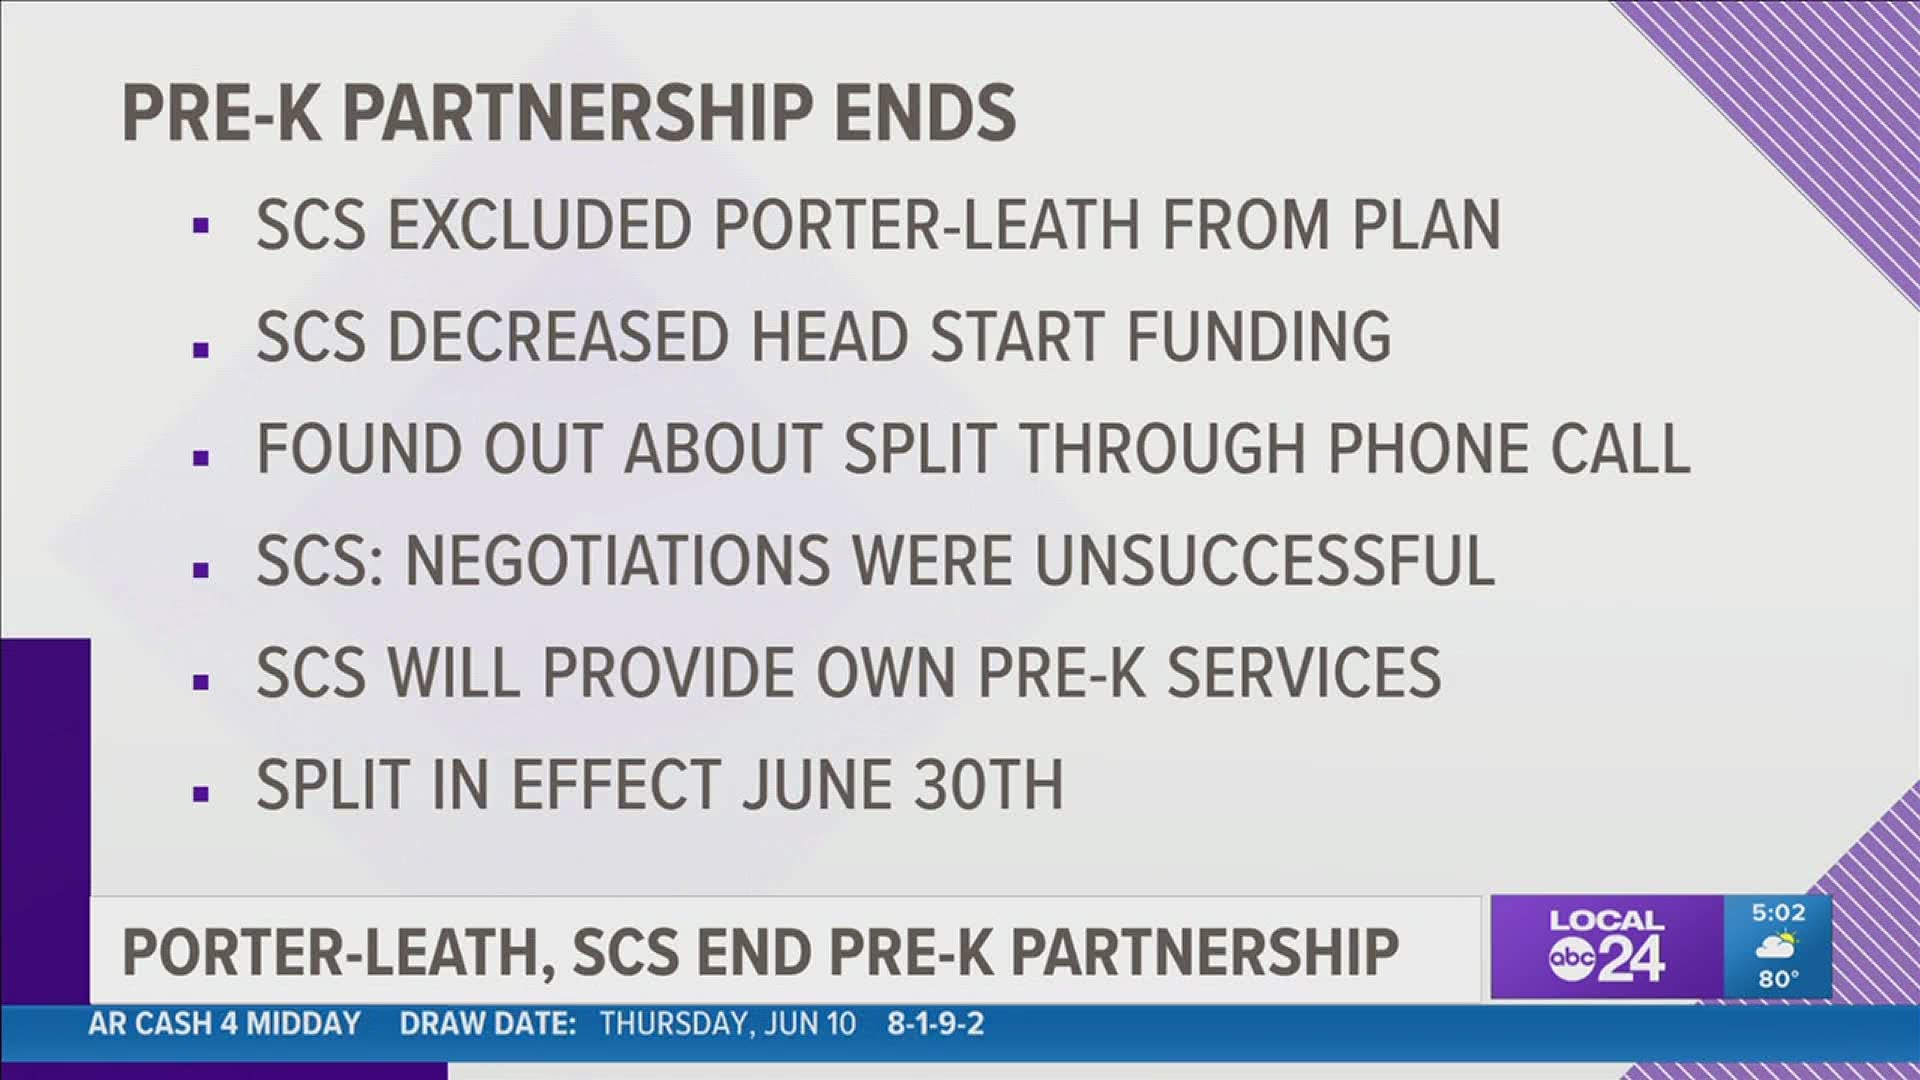 Porter-Leath said the split, which the group's leaders said they learned about on a statewide phone call, is effective June 30, 2021.